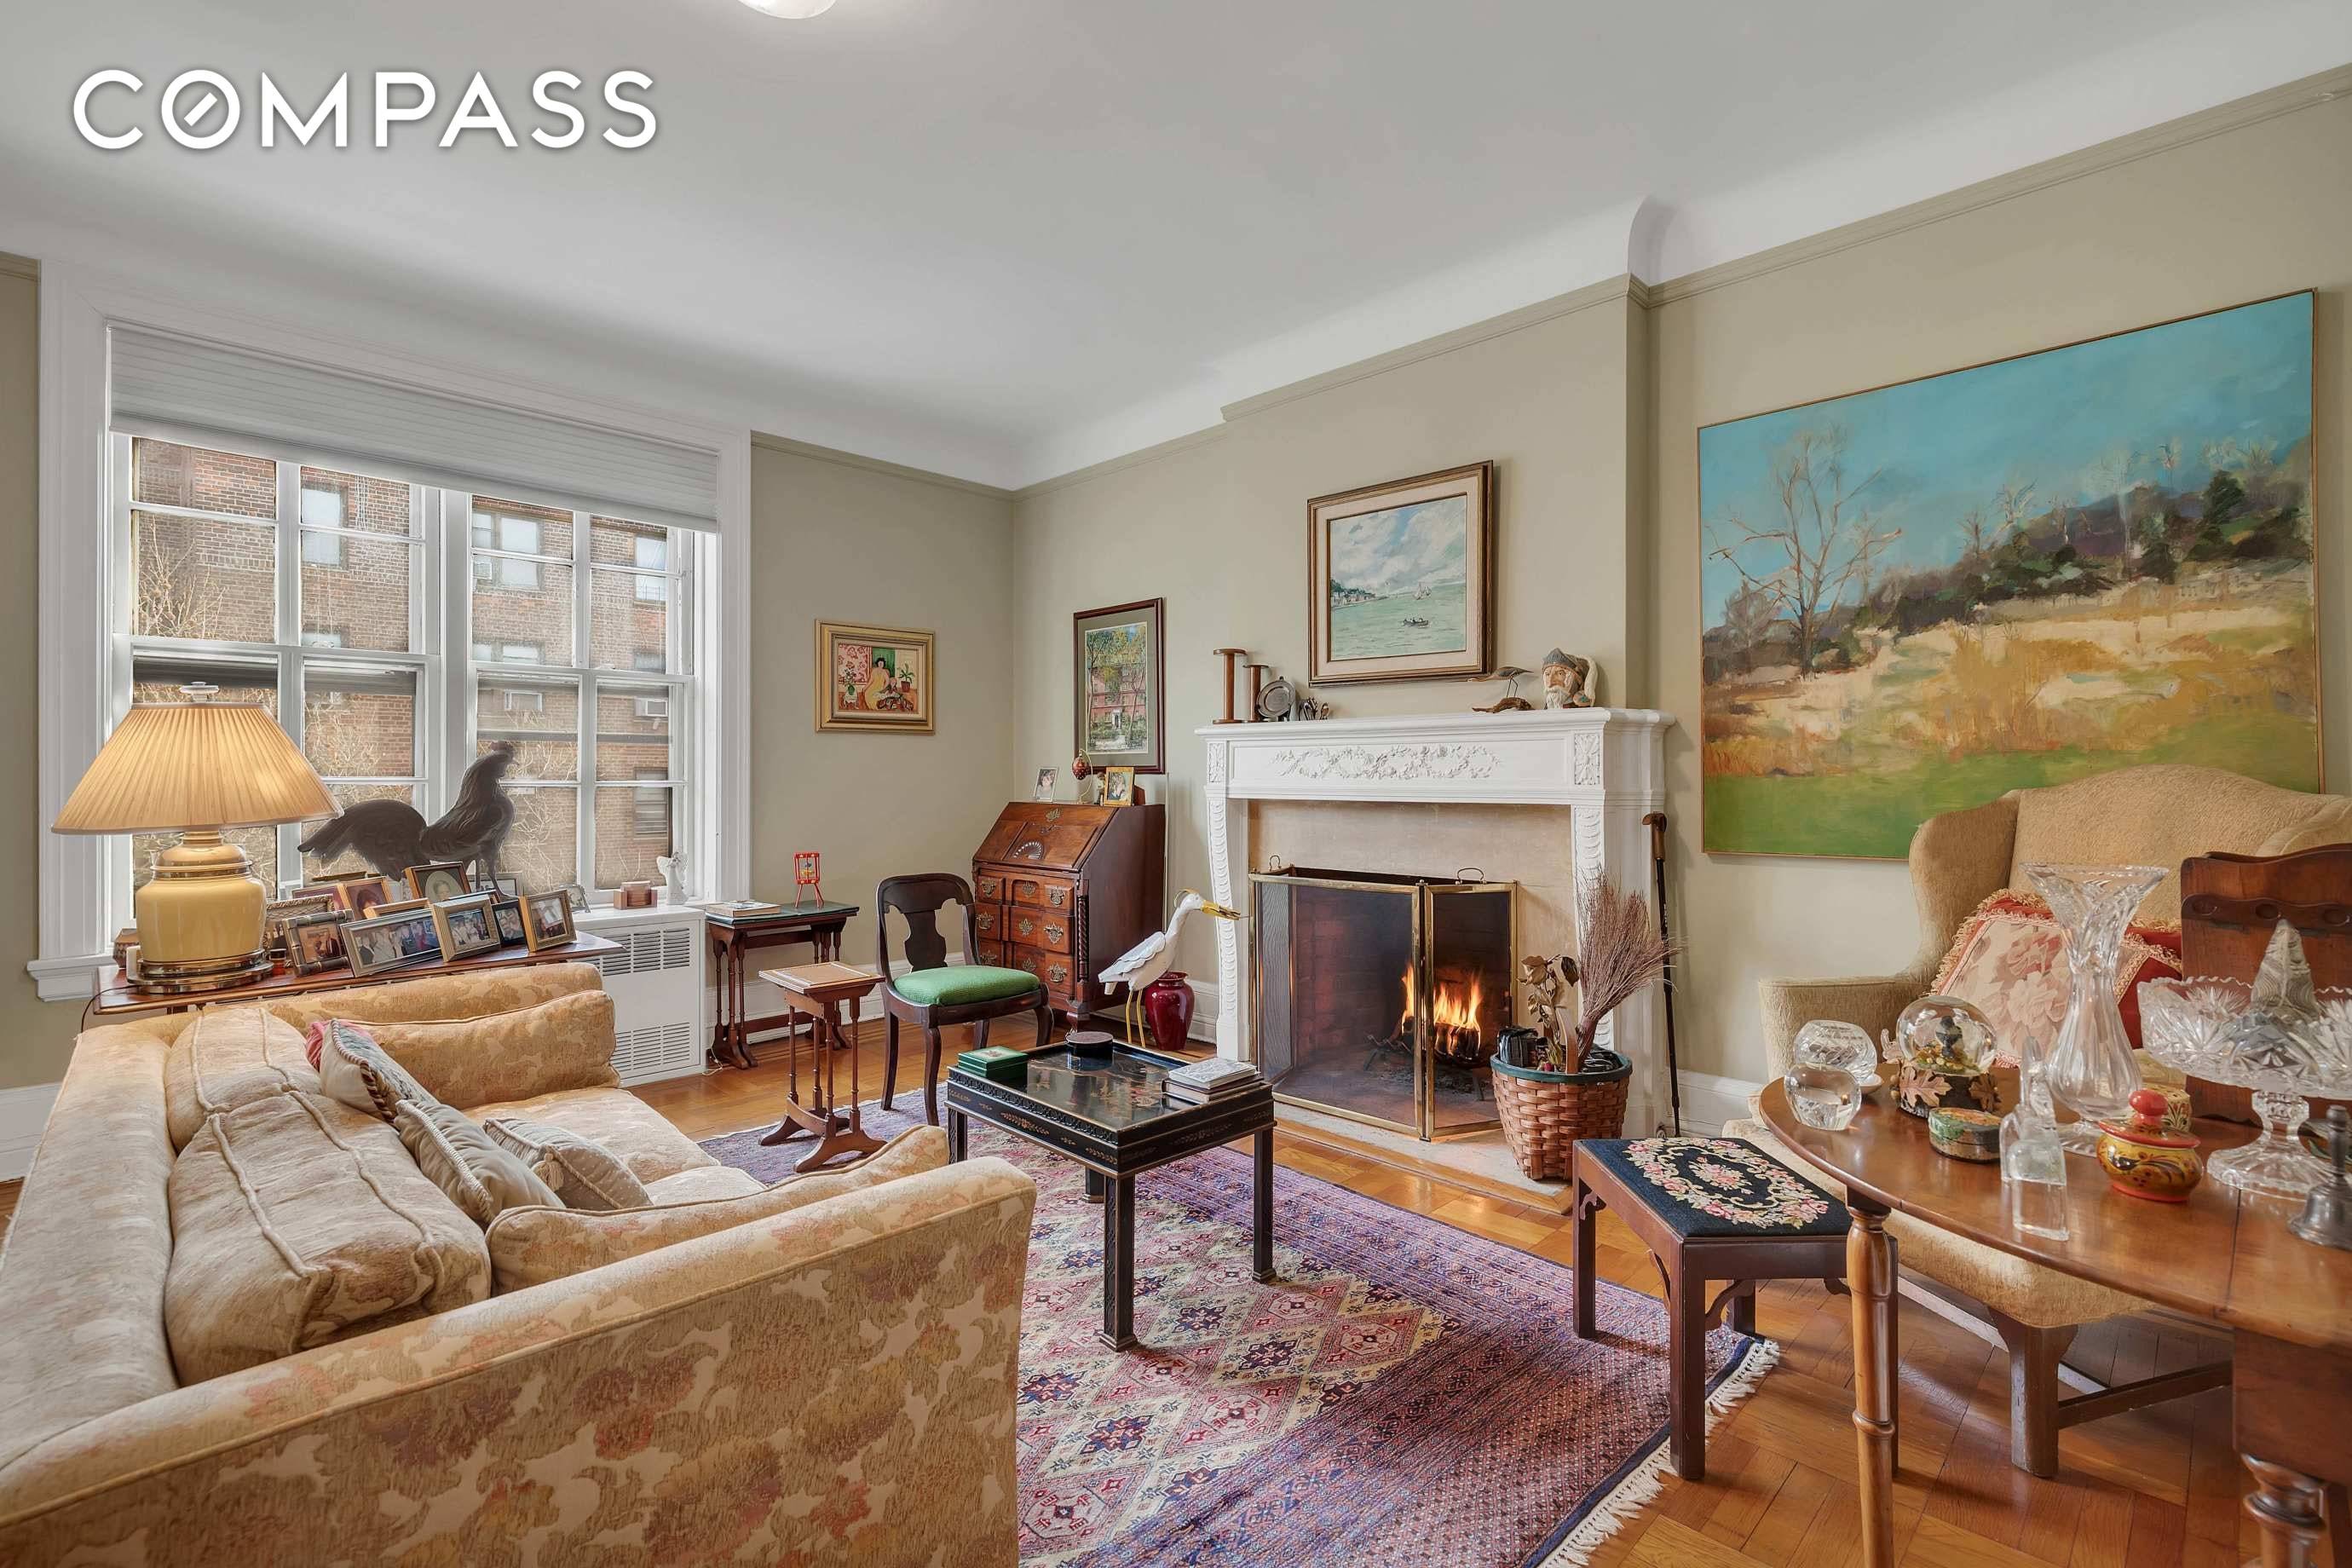 A charming pre war Chateau three bedroom and two bath gem with great light is available in historic Jackson Heights.